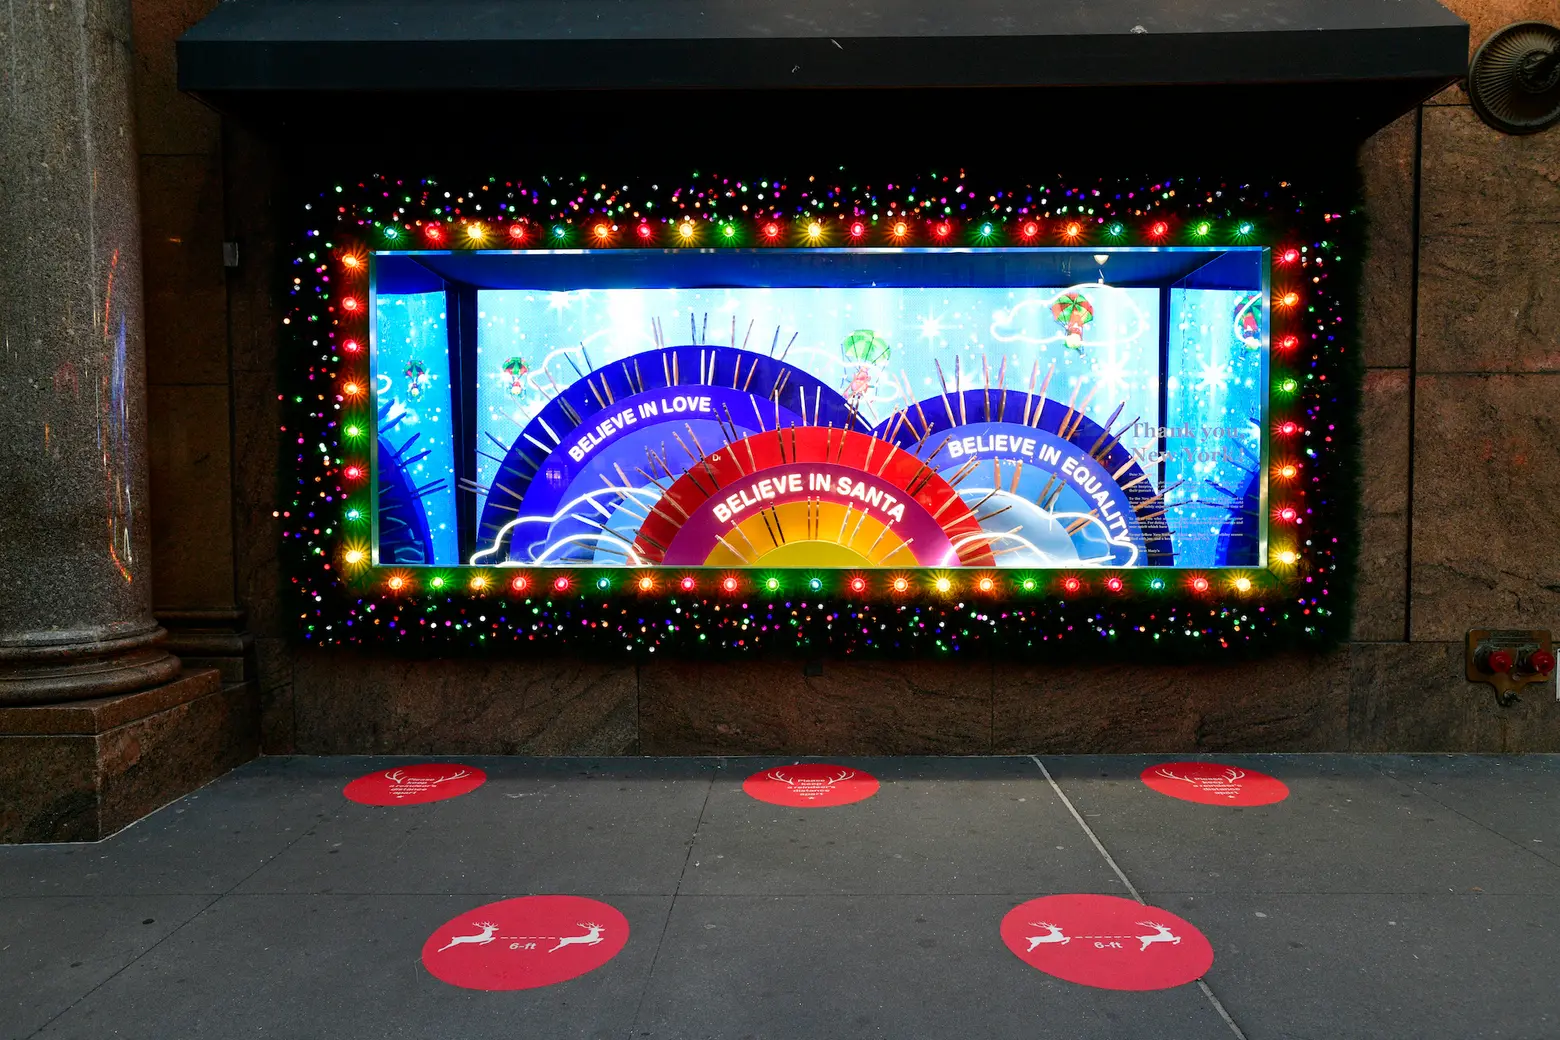 See the 2020 Holiday Window Displays by Department Stores – Footwear News